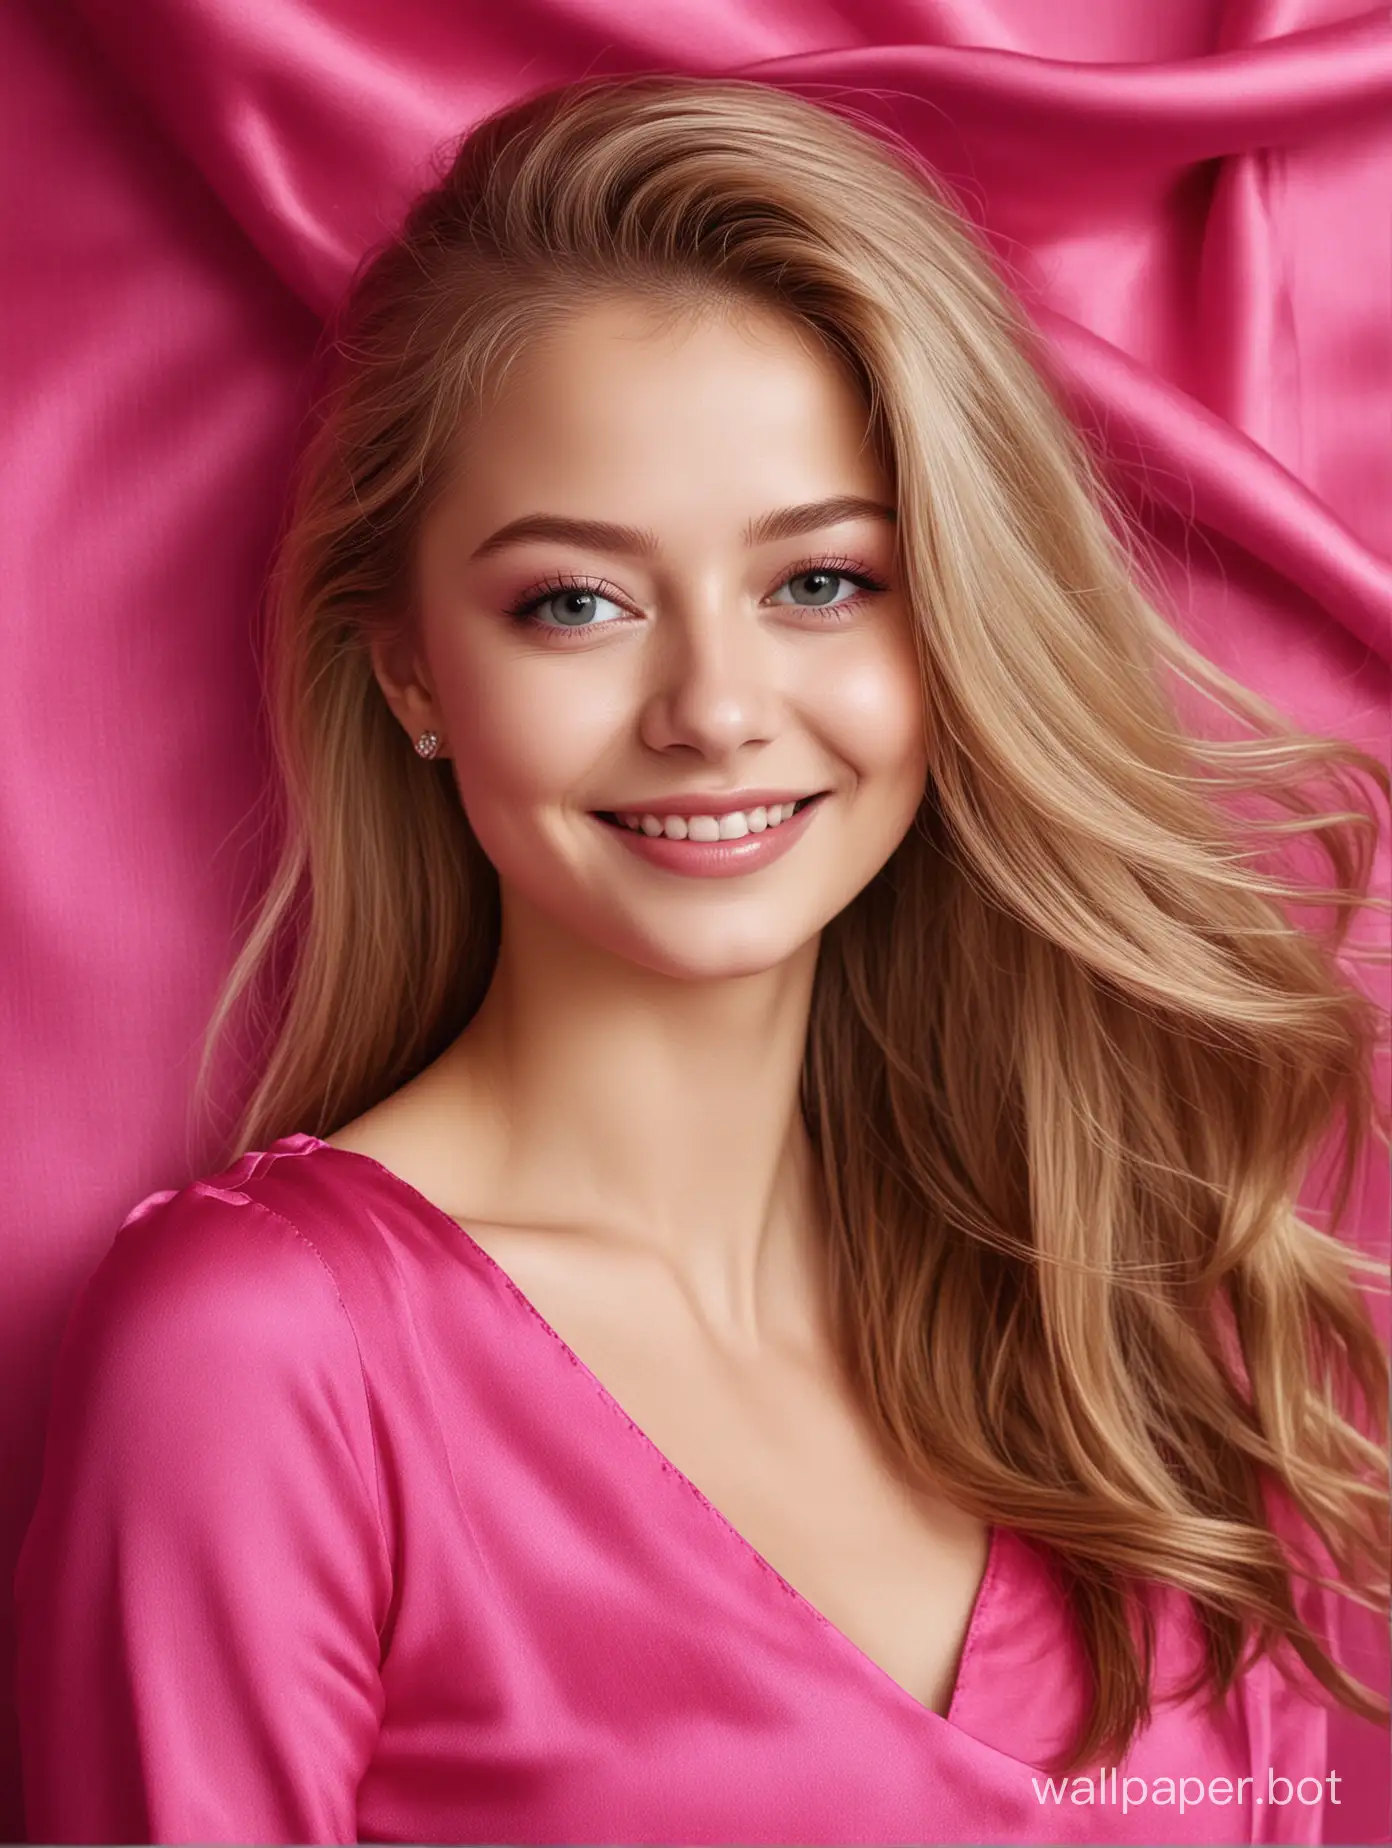 Sweet Yulia Lipnitskaya smiles with long straight silky hair in long Beautiful, gentle, Luxurious glamour natural hot pink fuchsia mulberry silk fabric